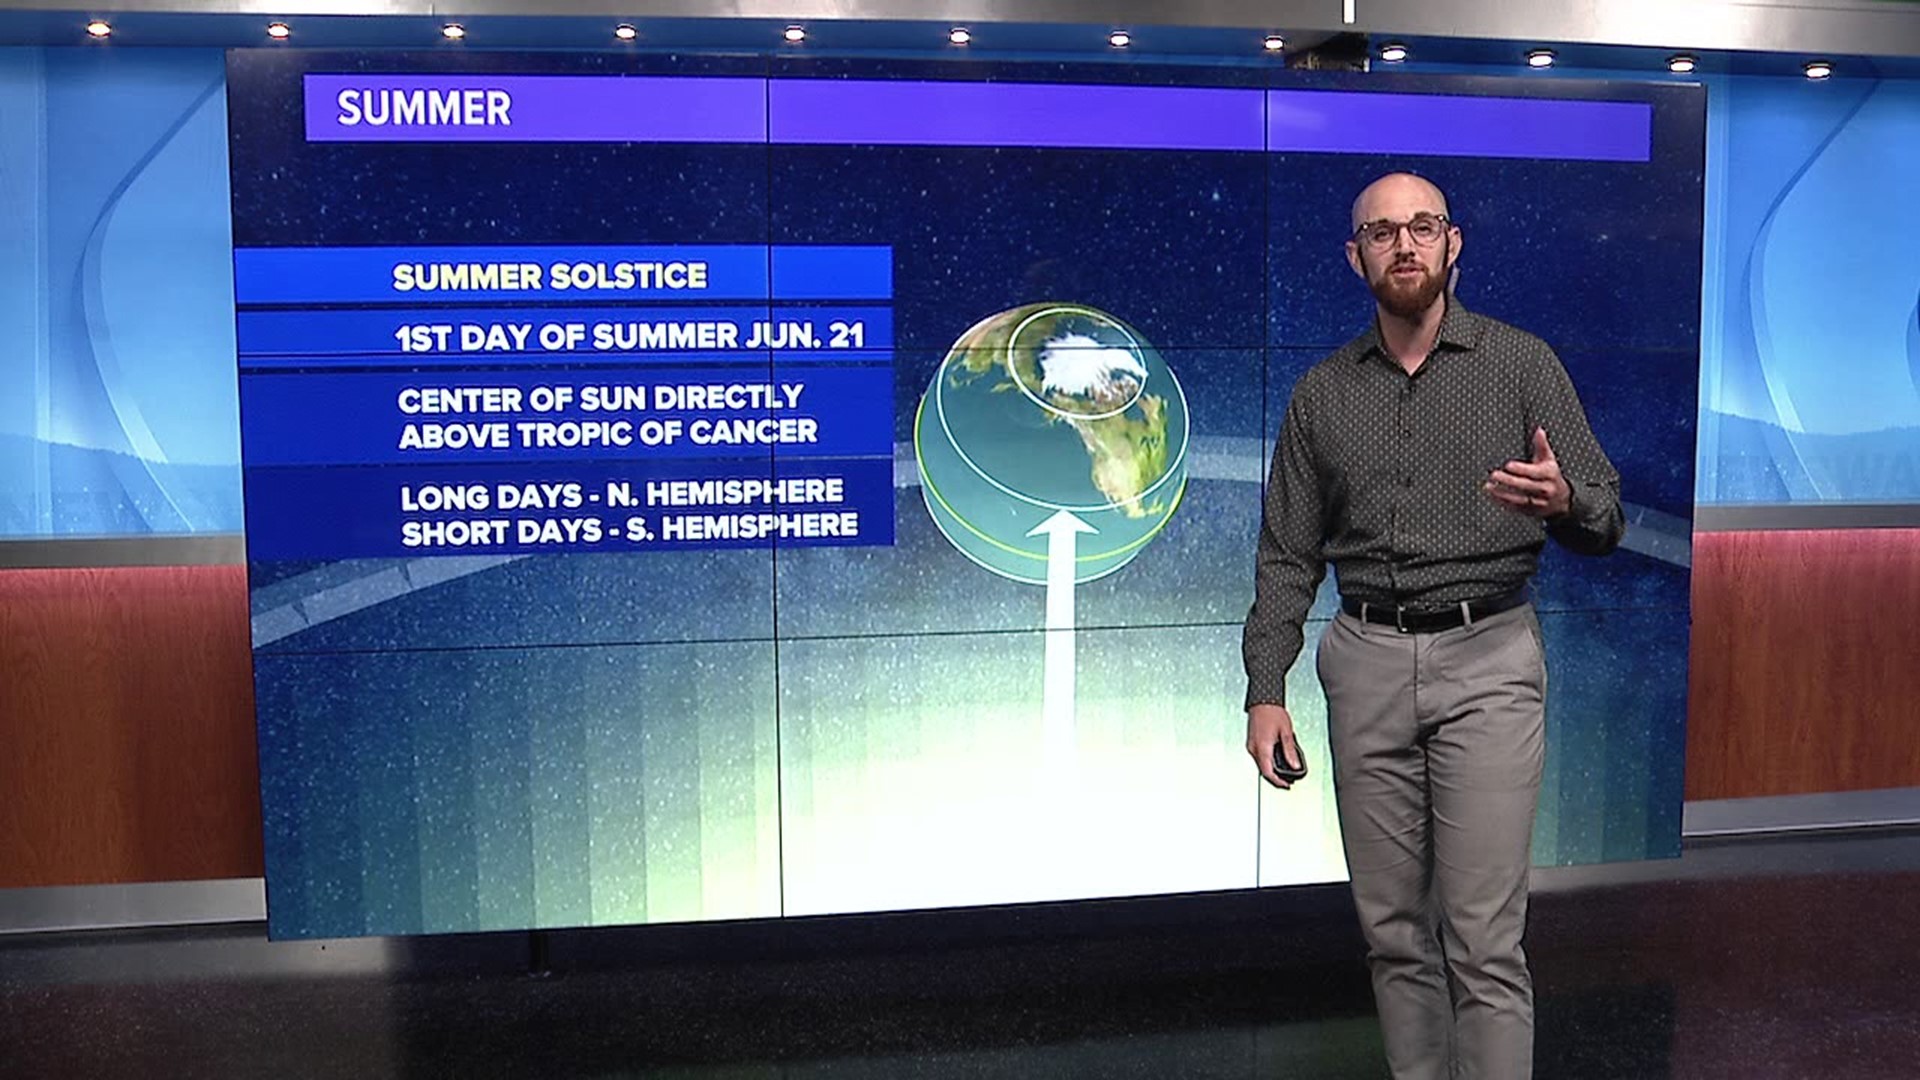 In this Skywatch 16, Meteorologist John Hickey shows us what the summer solstice means across the globe and what it looks like from space.